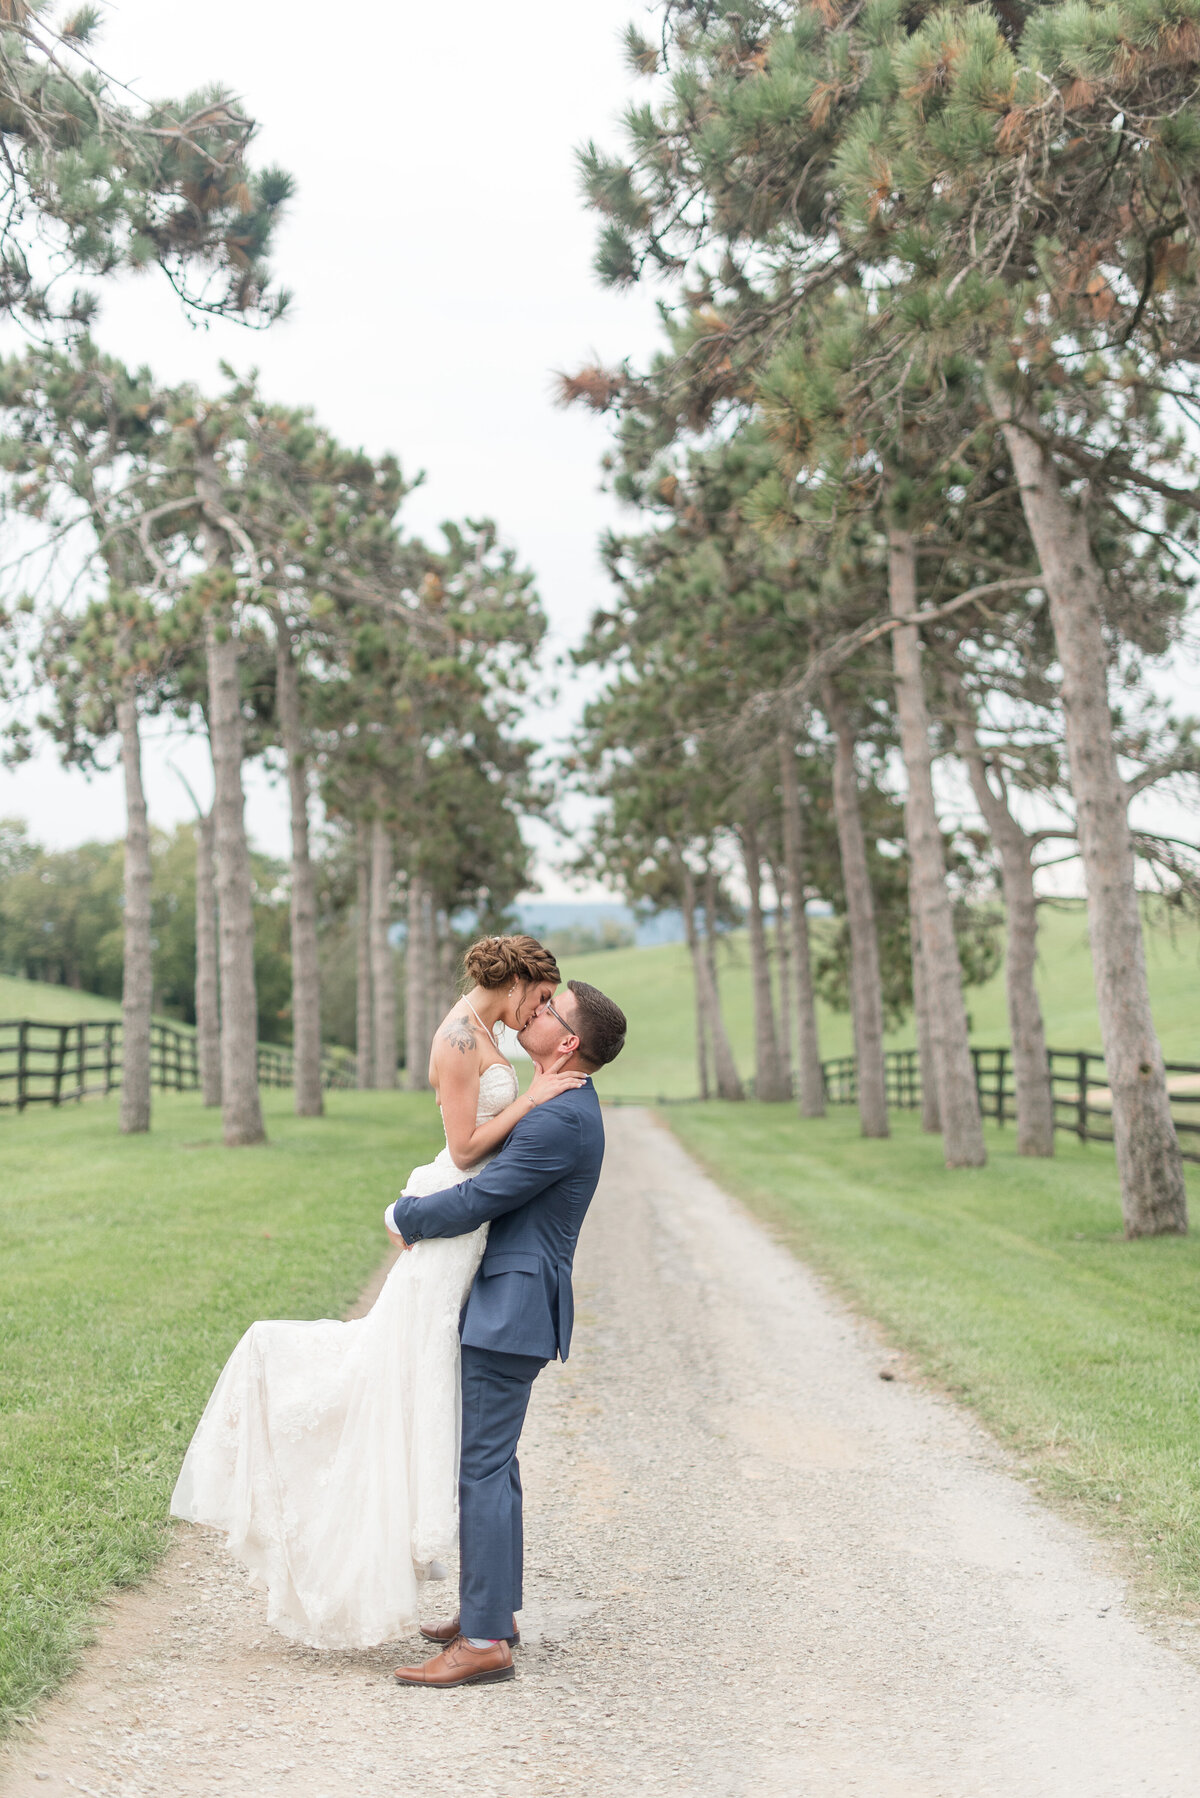 Groom lifting Bride off the ground as they kiss on tree-lined pathway at Lauxmont Farms.